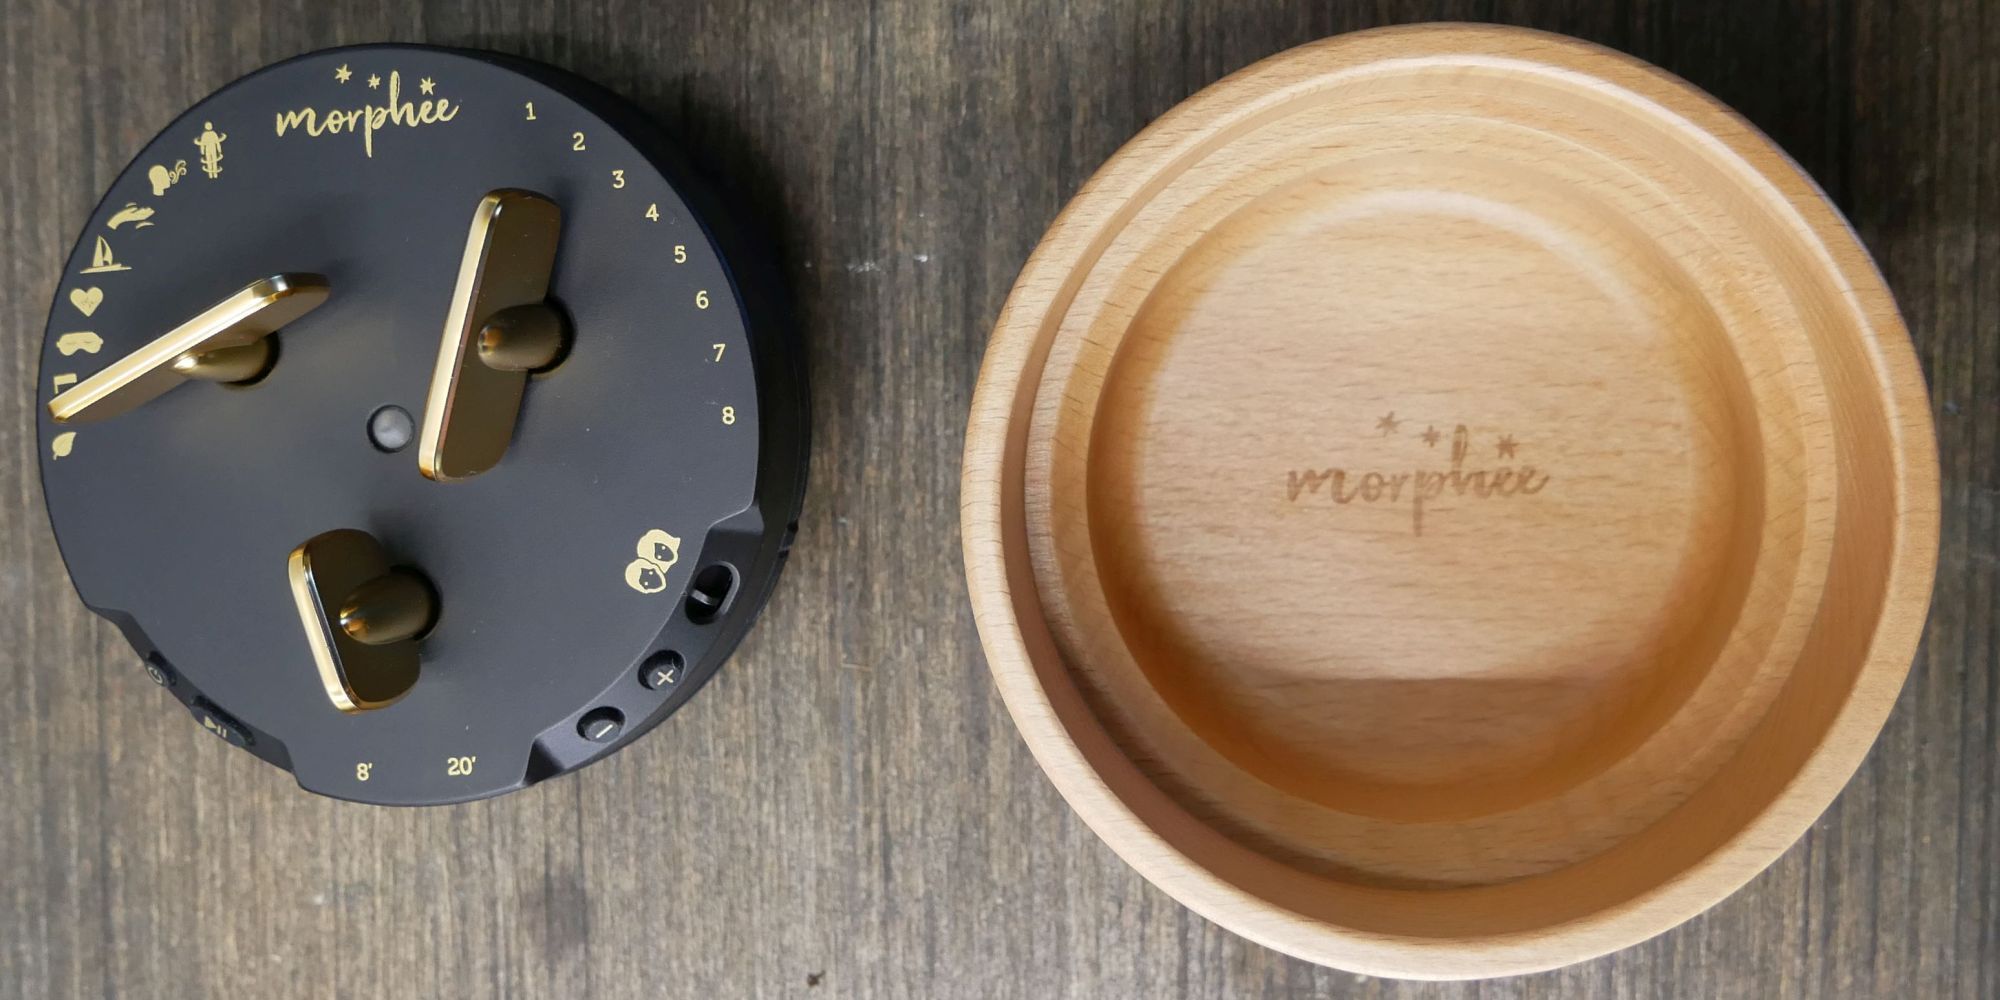 Morphee sound unit next to its wooden base and lid